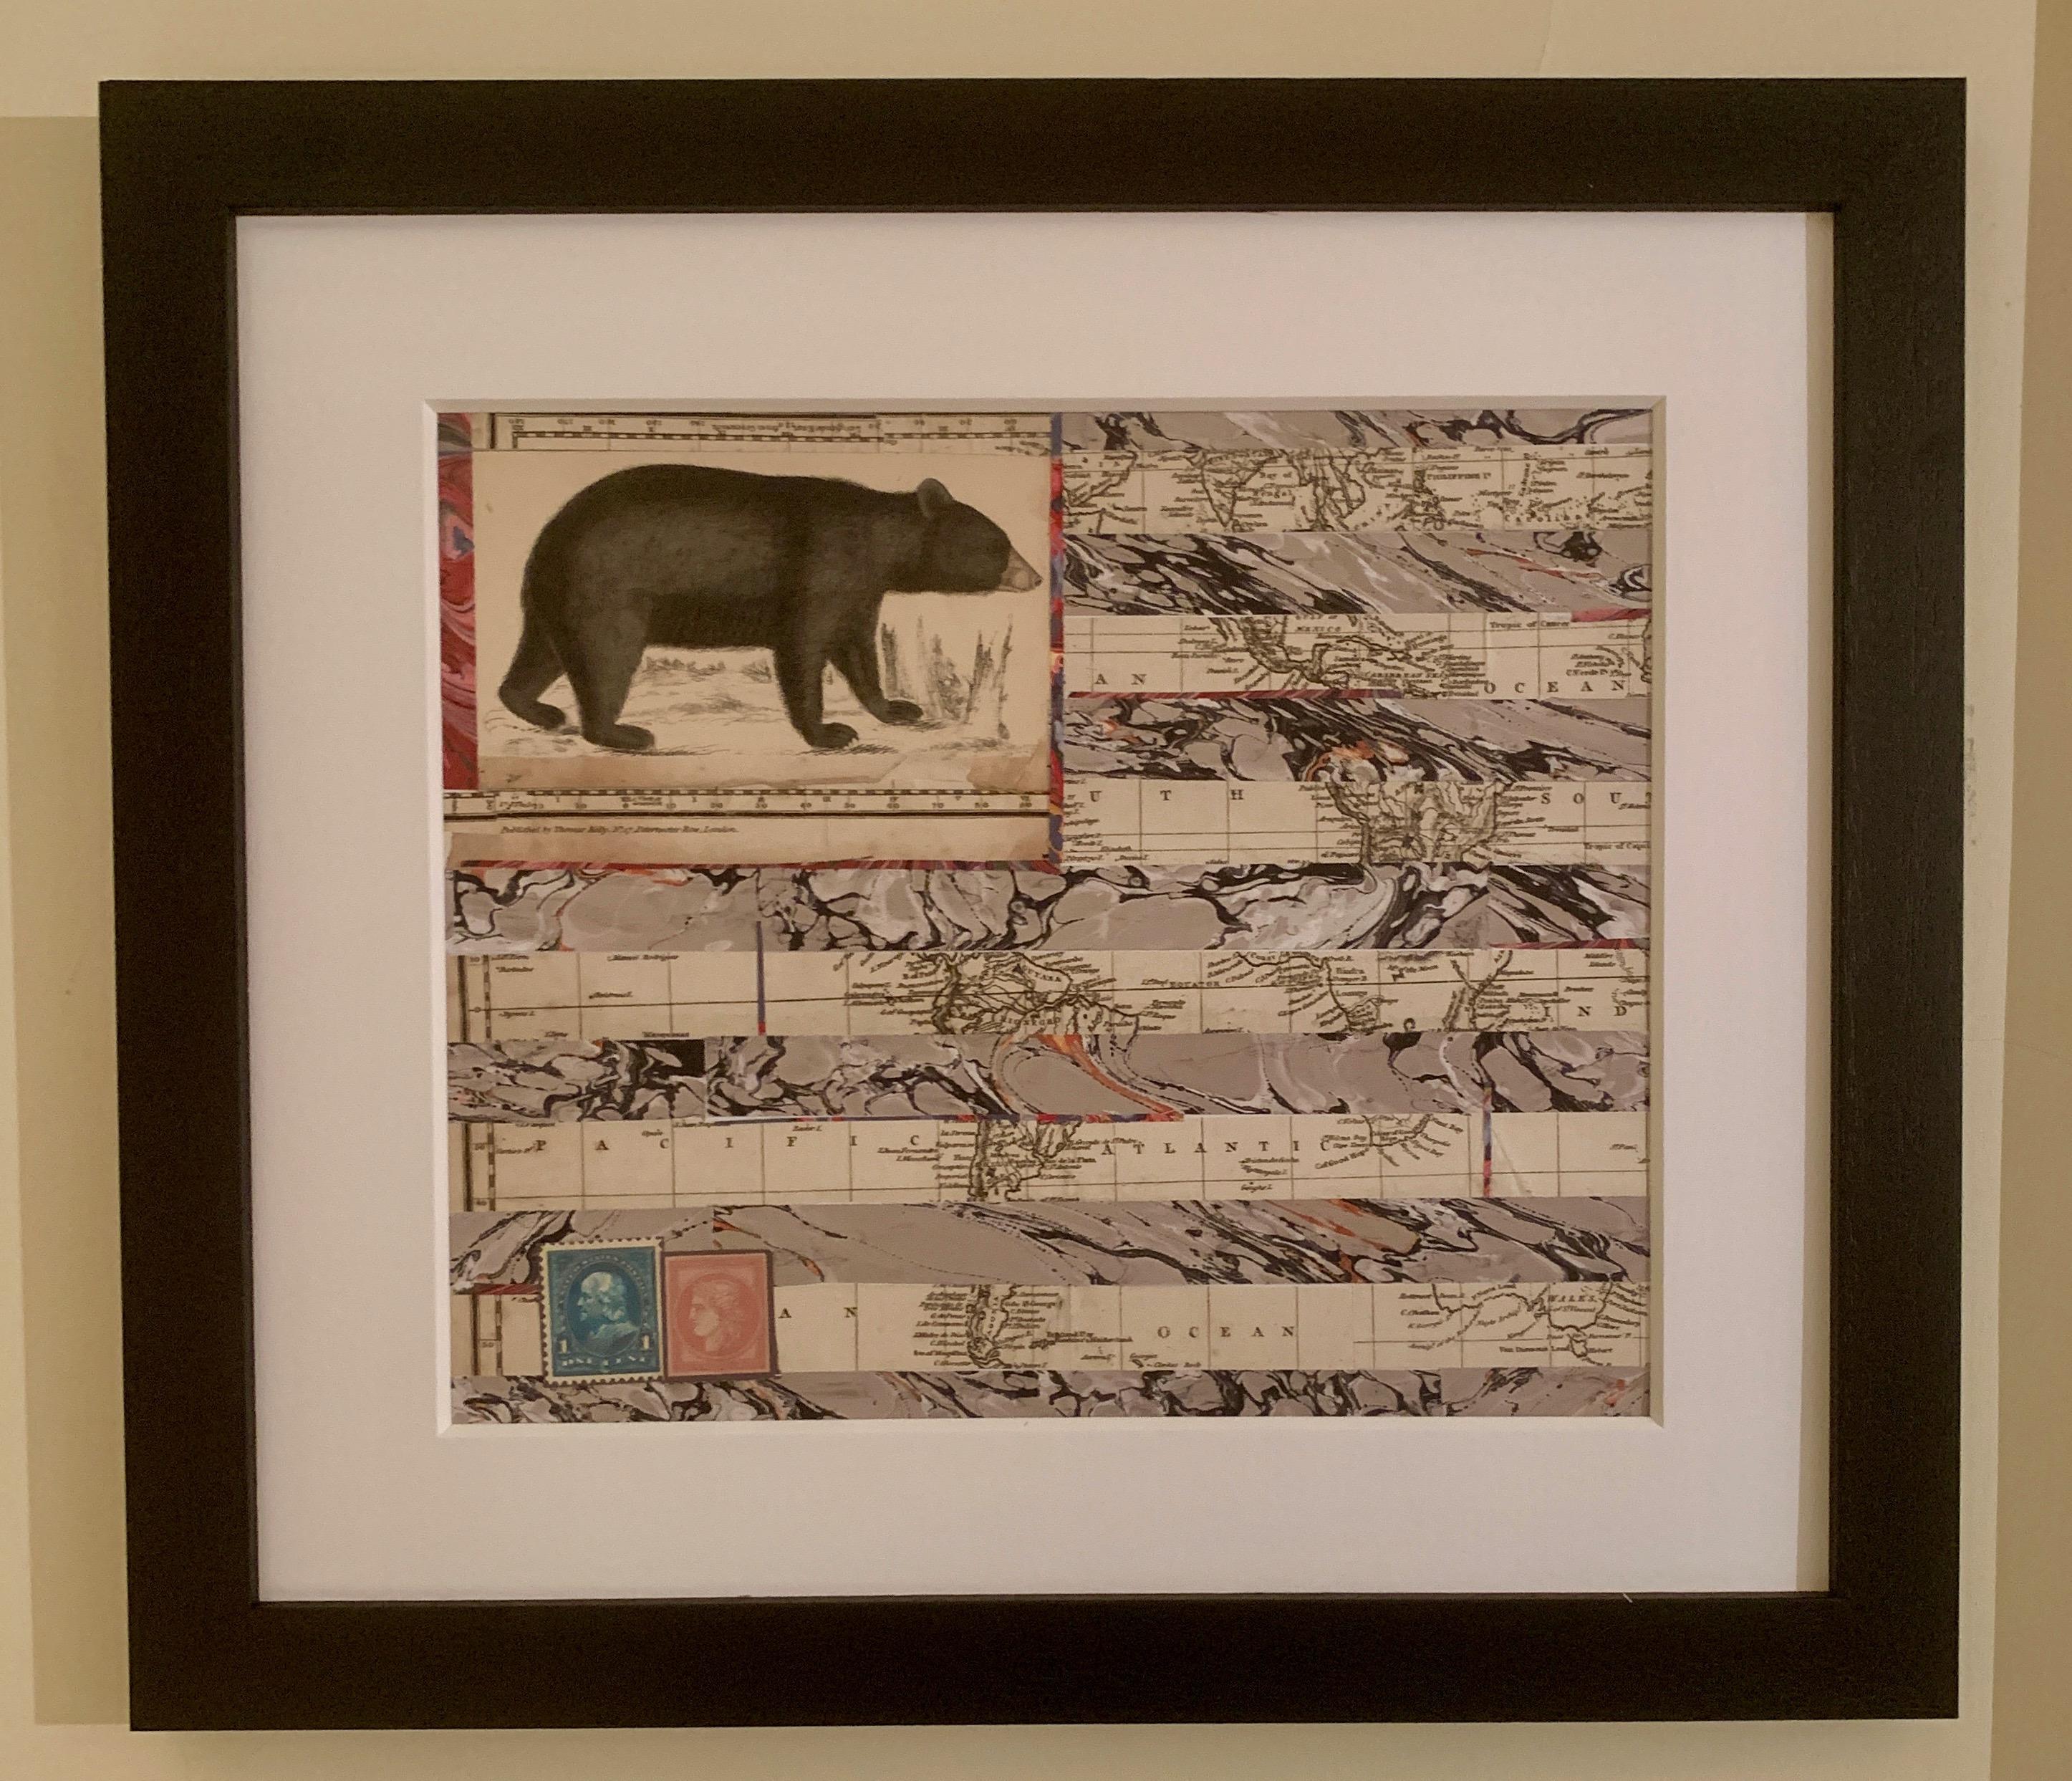 Claude Howard Stuart Figurative Art – American flag collage with a 19th C hand colored engraving of a bear